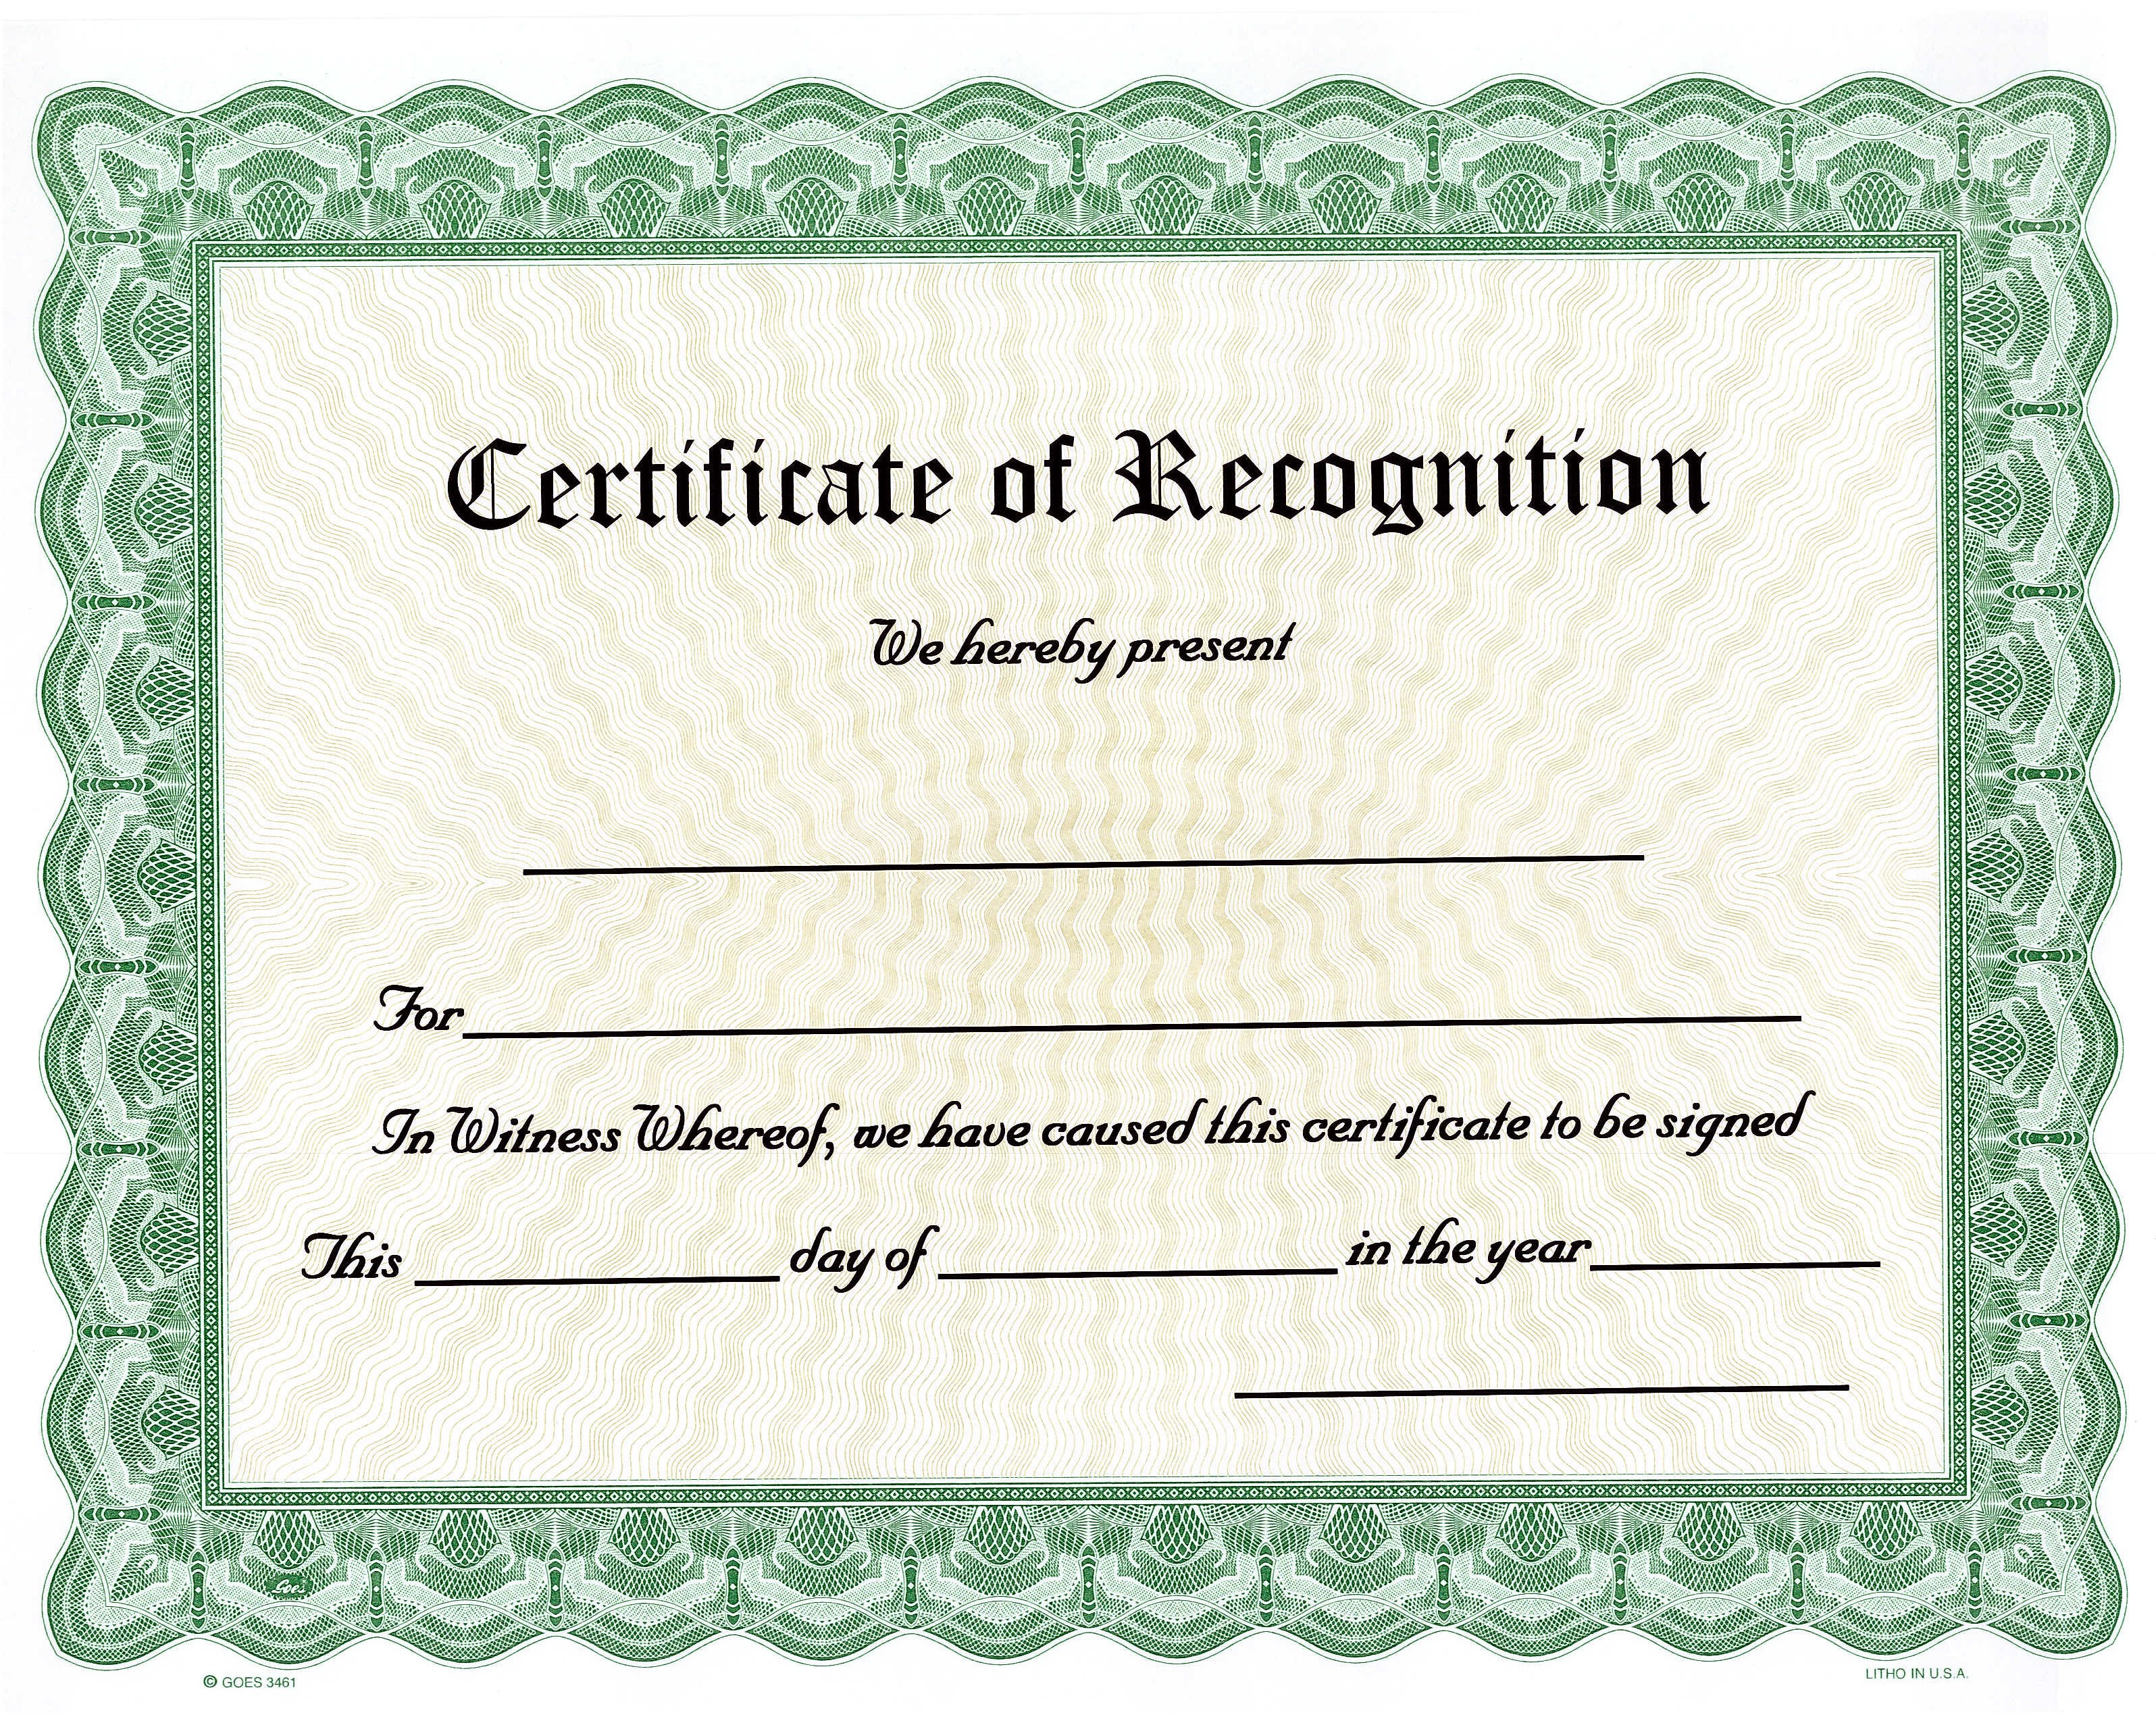 Need certificates to recognize an outstanding organization member? Bestow tangible rewards. Get beautiful, blank Goes templates shipped right away to fill out and distribute.